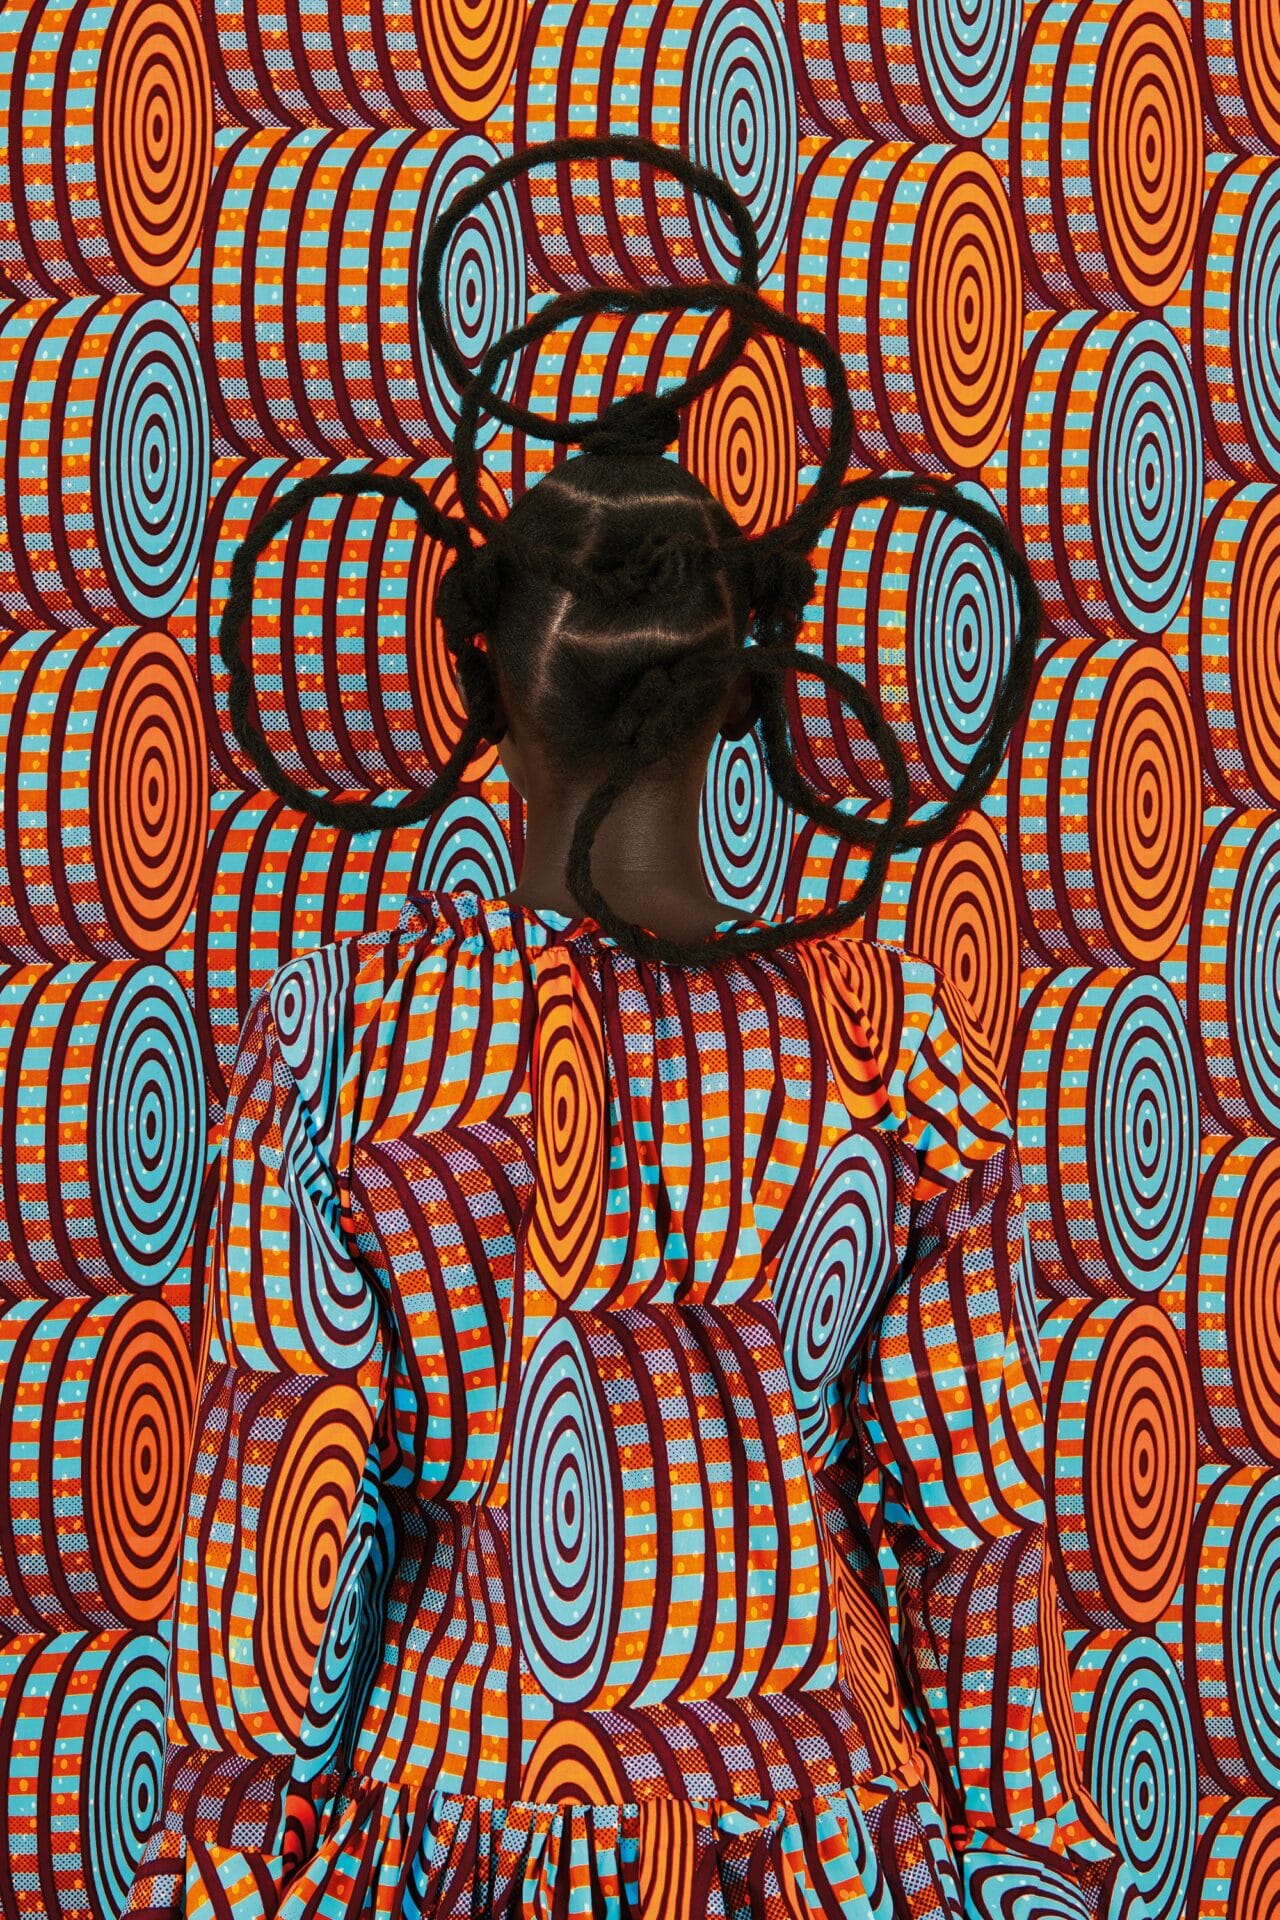 a portrait of the artist against a patterned orange and blue backdrop. her back is facing the camera